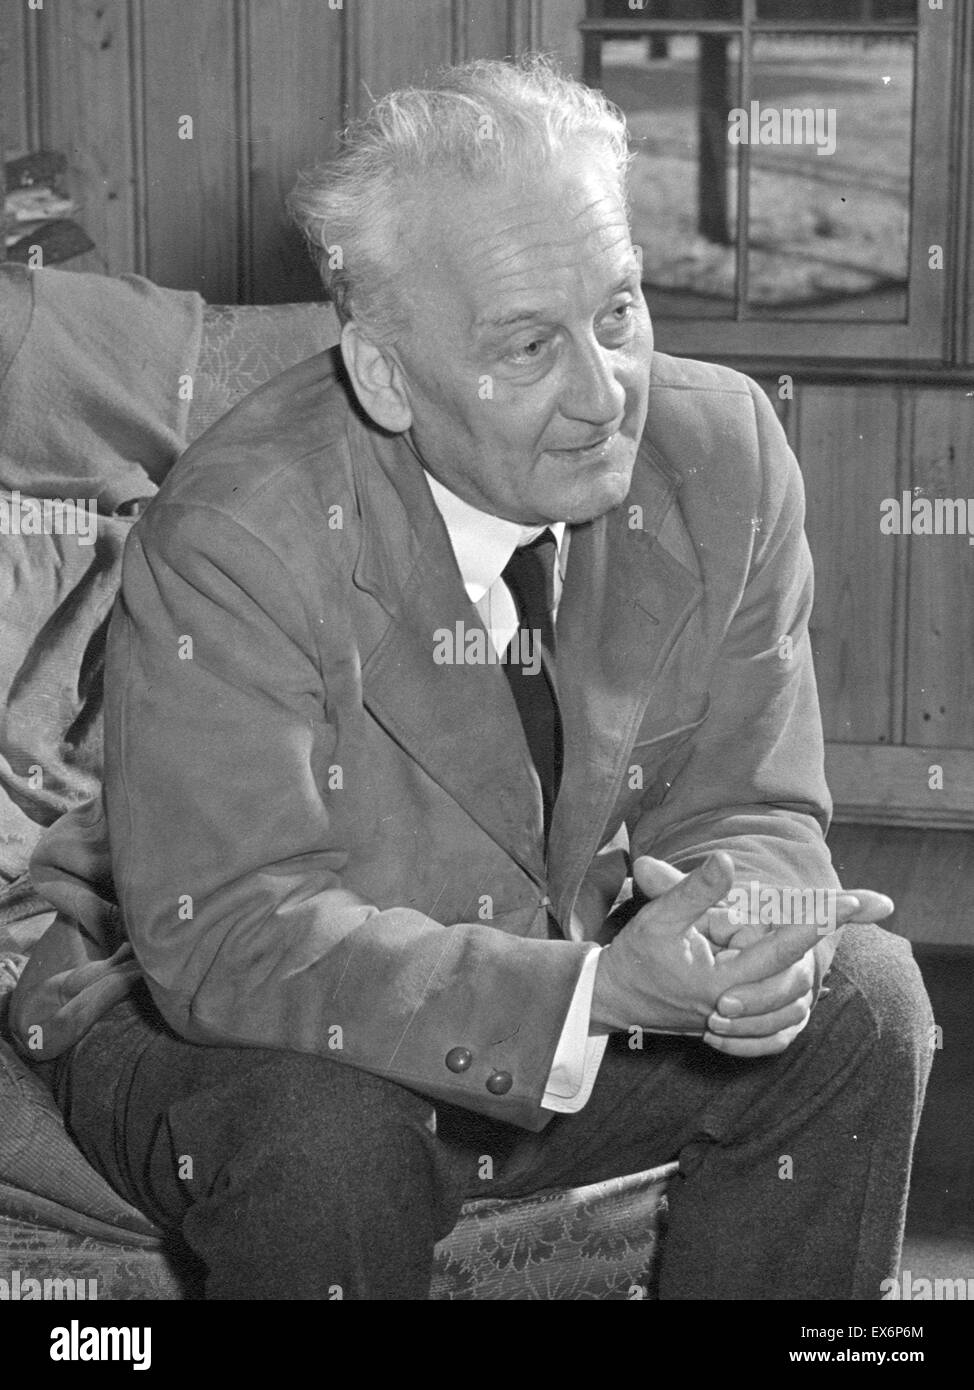 Albert Imre Szent-Gyorgyi (1893-1986), a Hungarian-born biochemist, was the first to isolate vitamin C. His discoveries revolutionized the field of muscle research 1948 Stock Photo